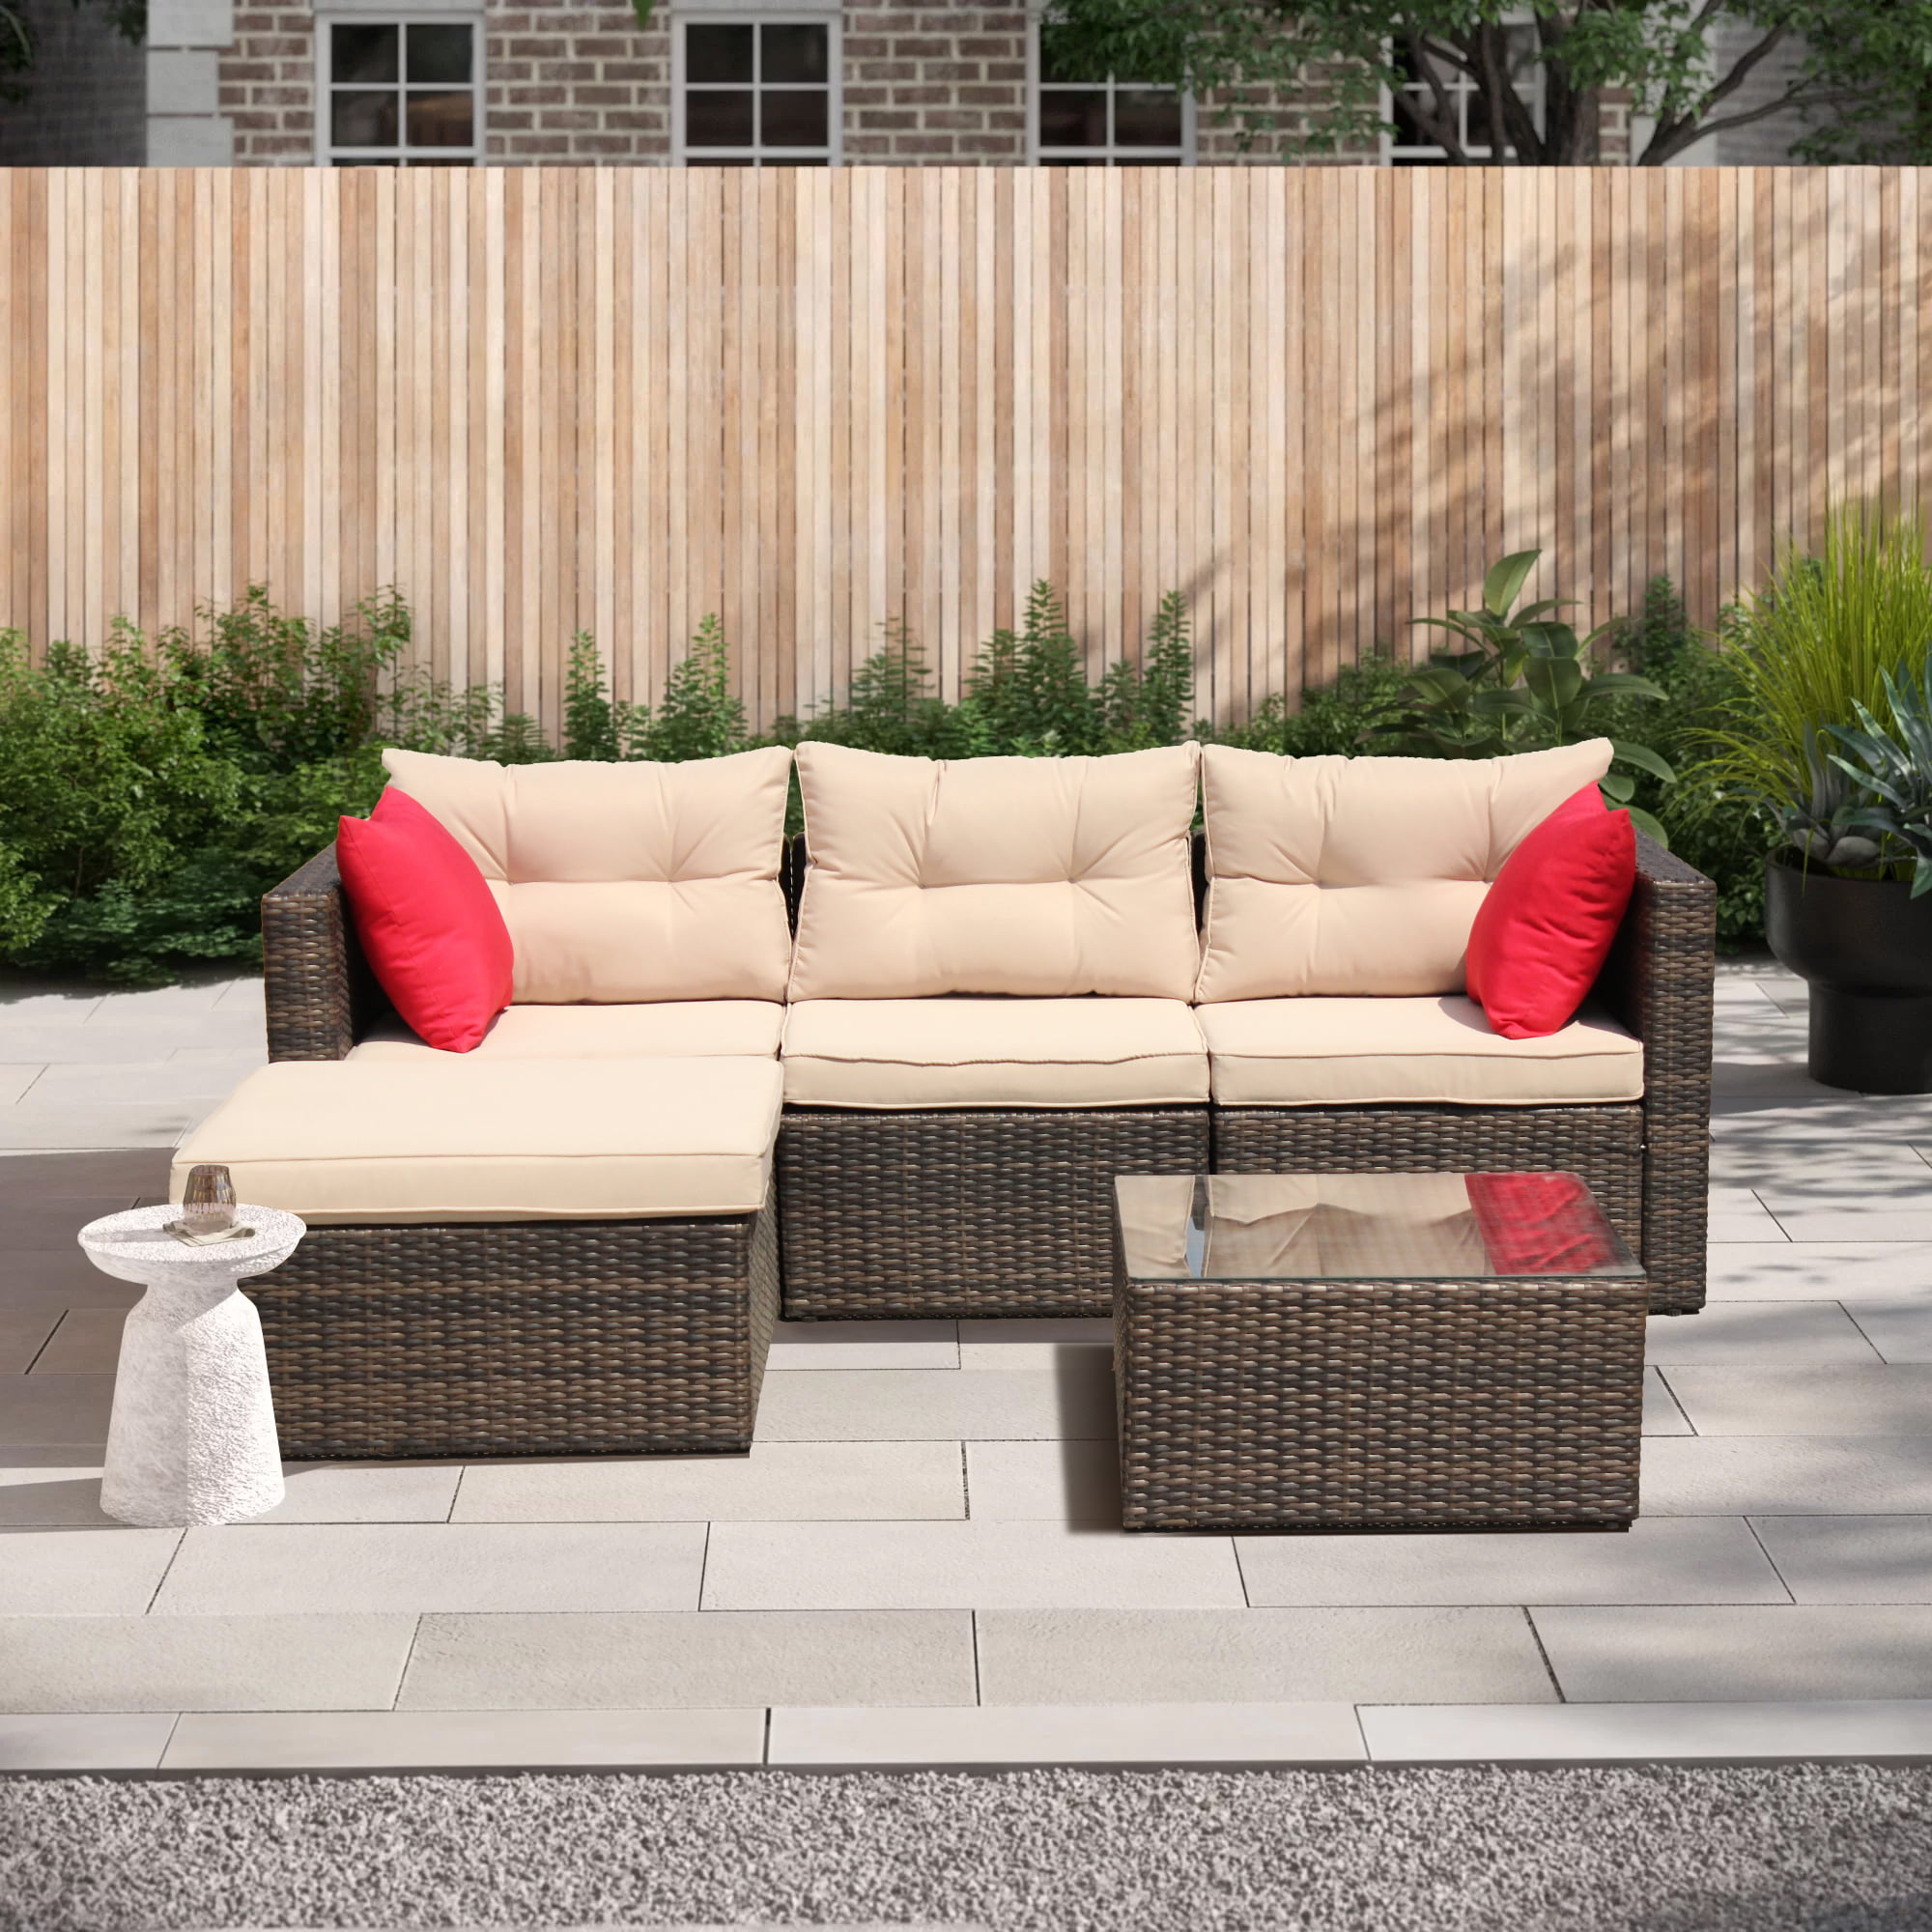 Outdoor Patio Furniture Sets, 5 Piece Ratten Wicker Sectional Sofa Set